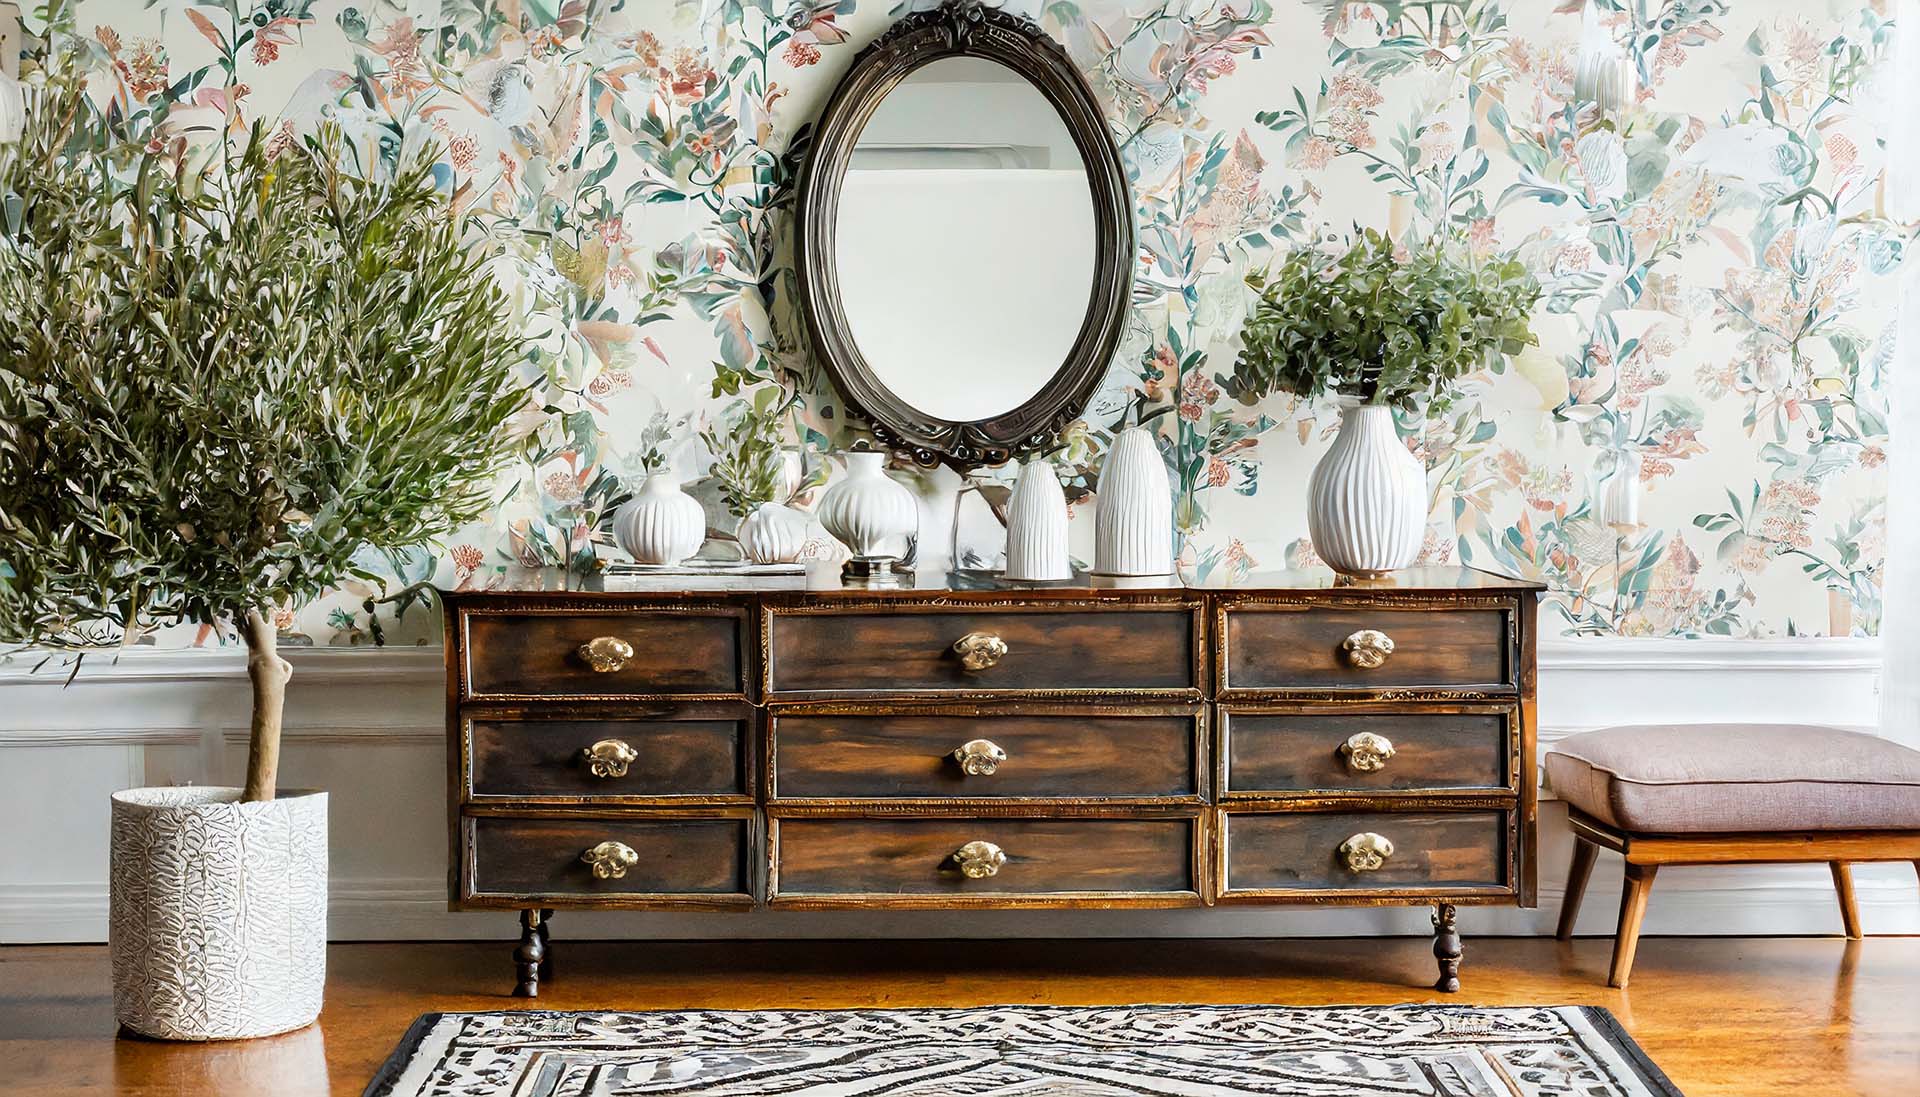 Transitional interior design with vintage apothecary chest, modern vases, traditional floral wallpaper, and olive tree.